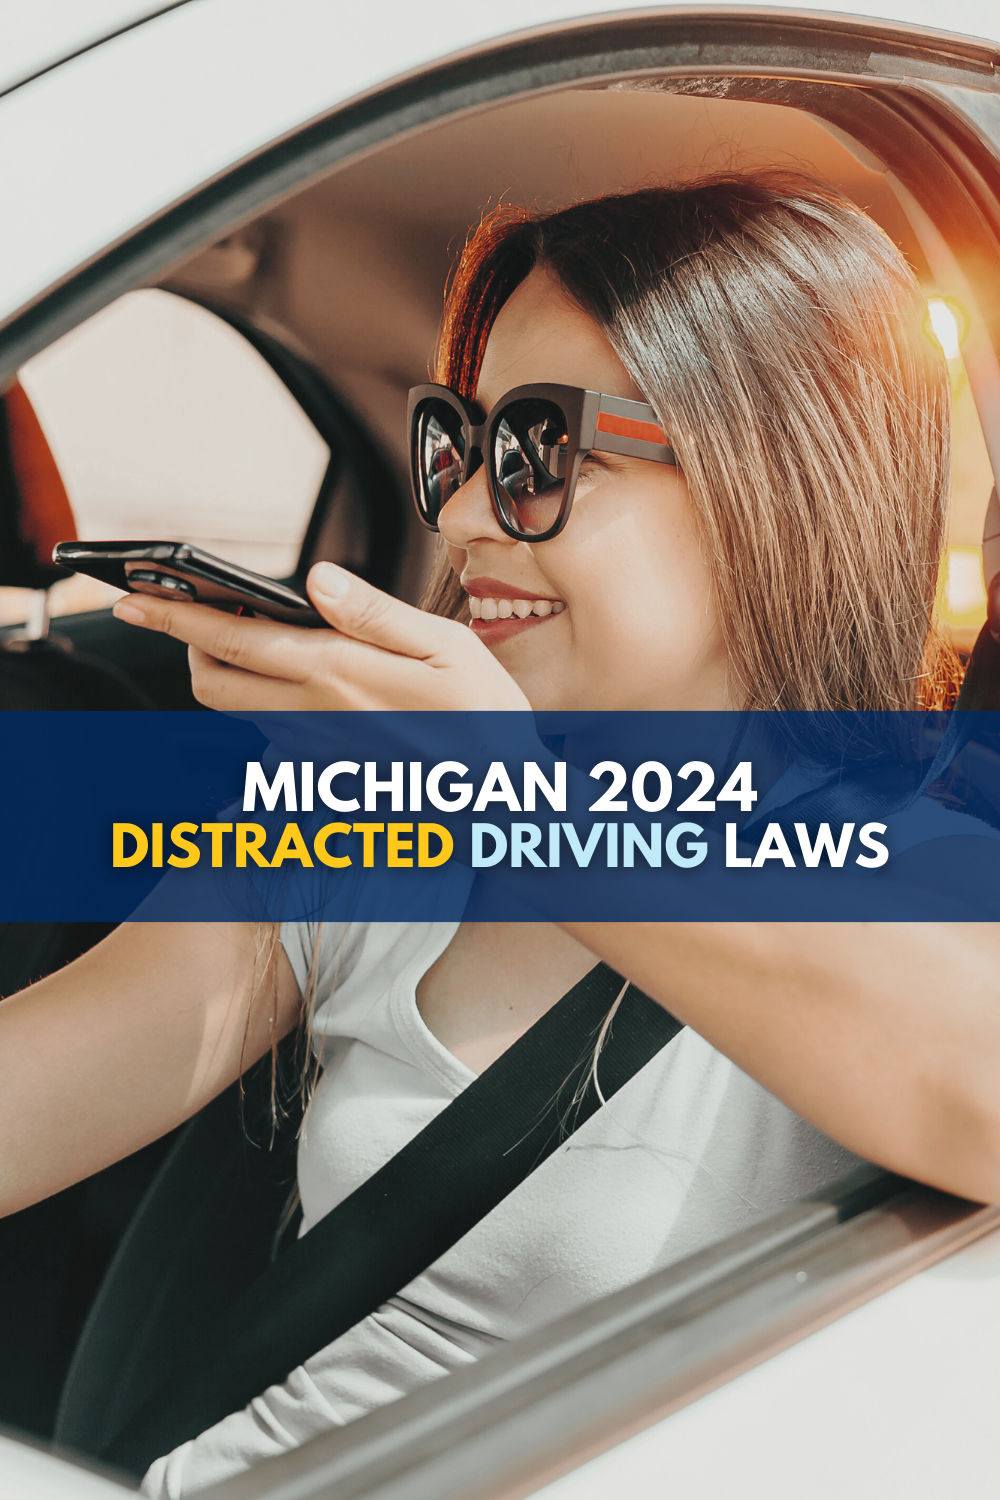 Michigan Distracted Driving Laws 2024: Here’s What To Know